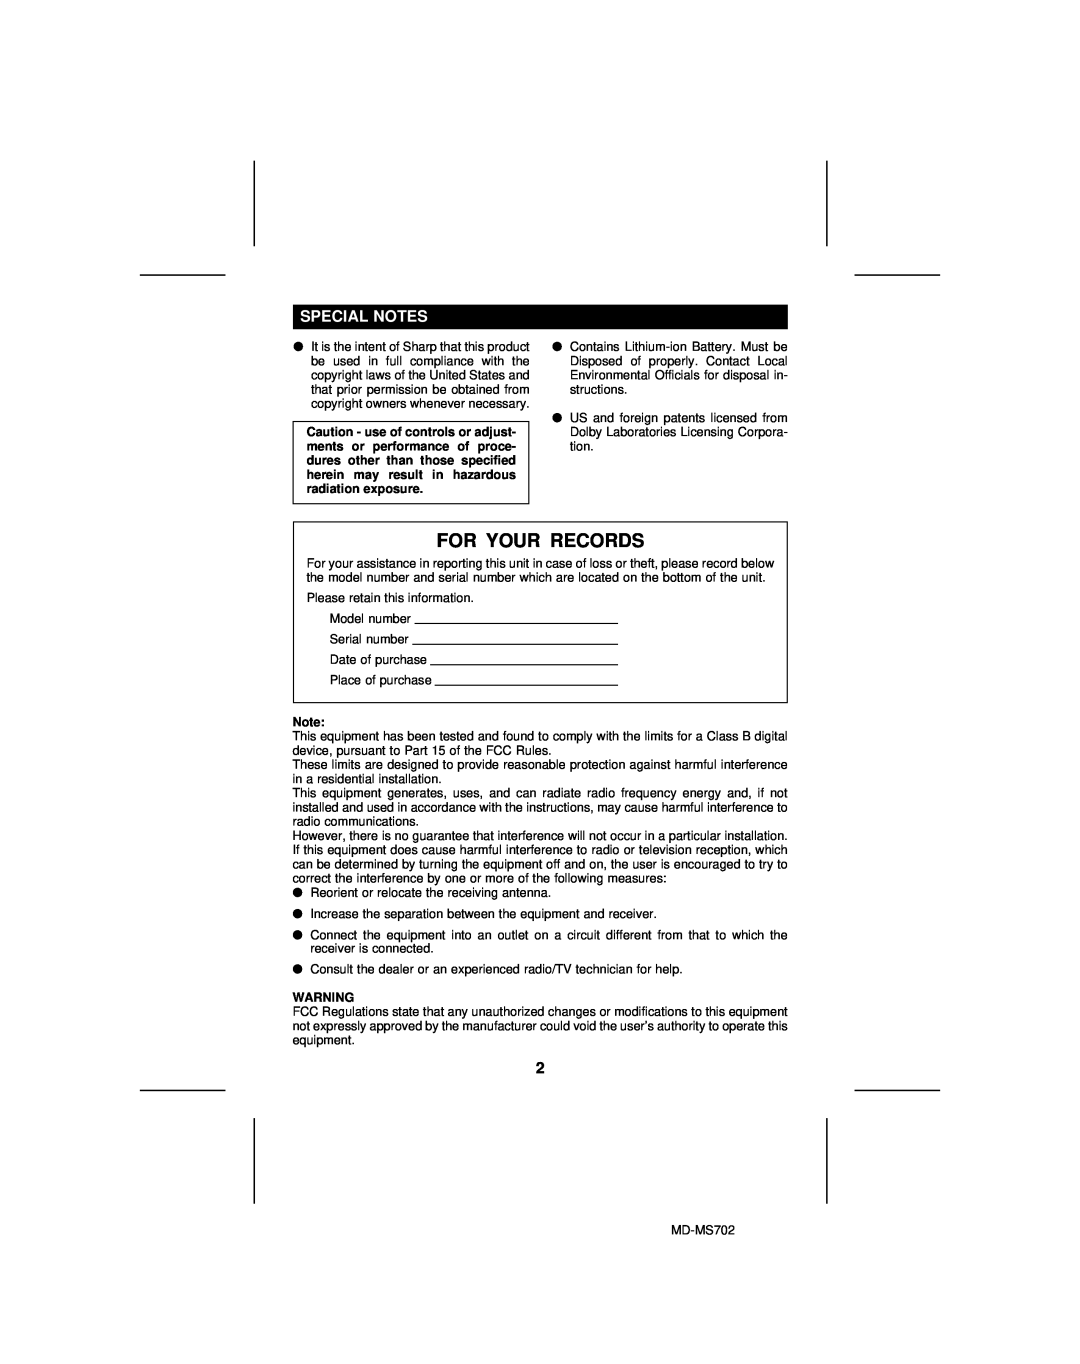 Sharp MD-MS702, MD-R2 operation manual Special Notes, For Your Records 